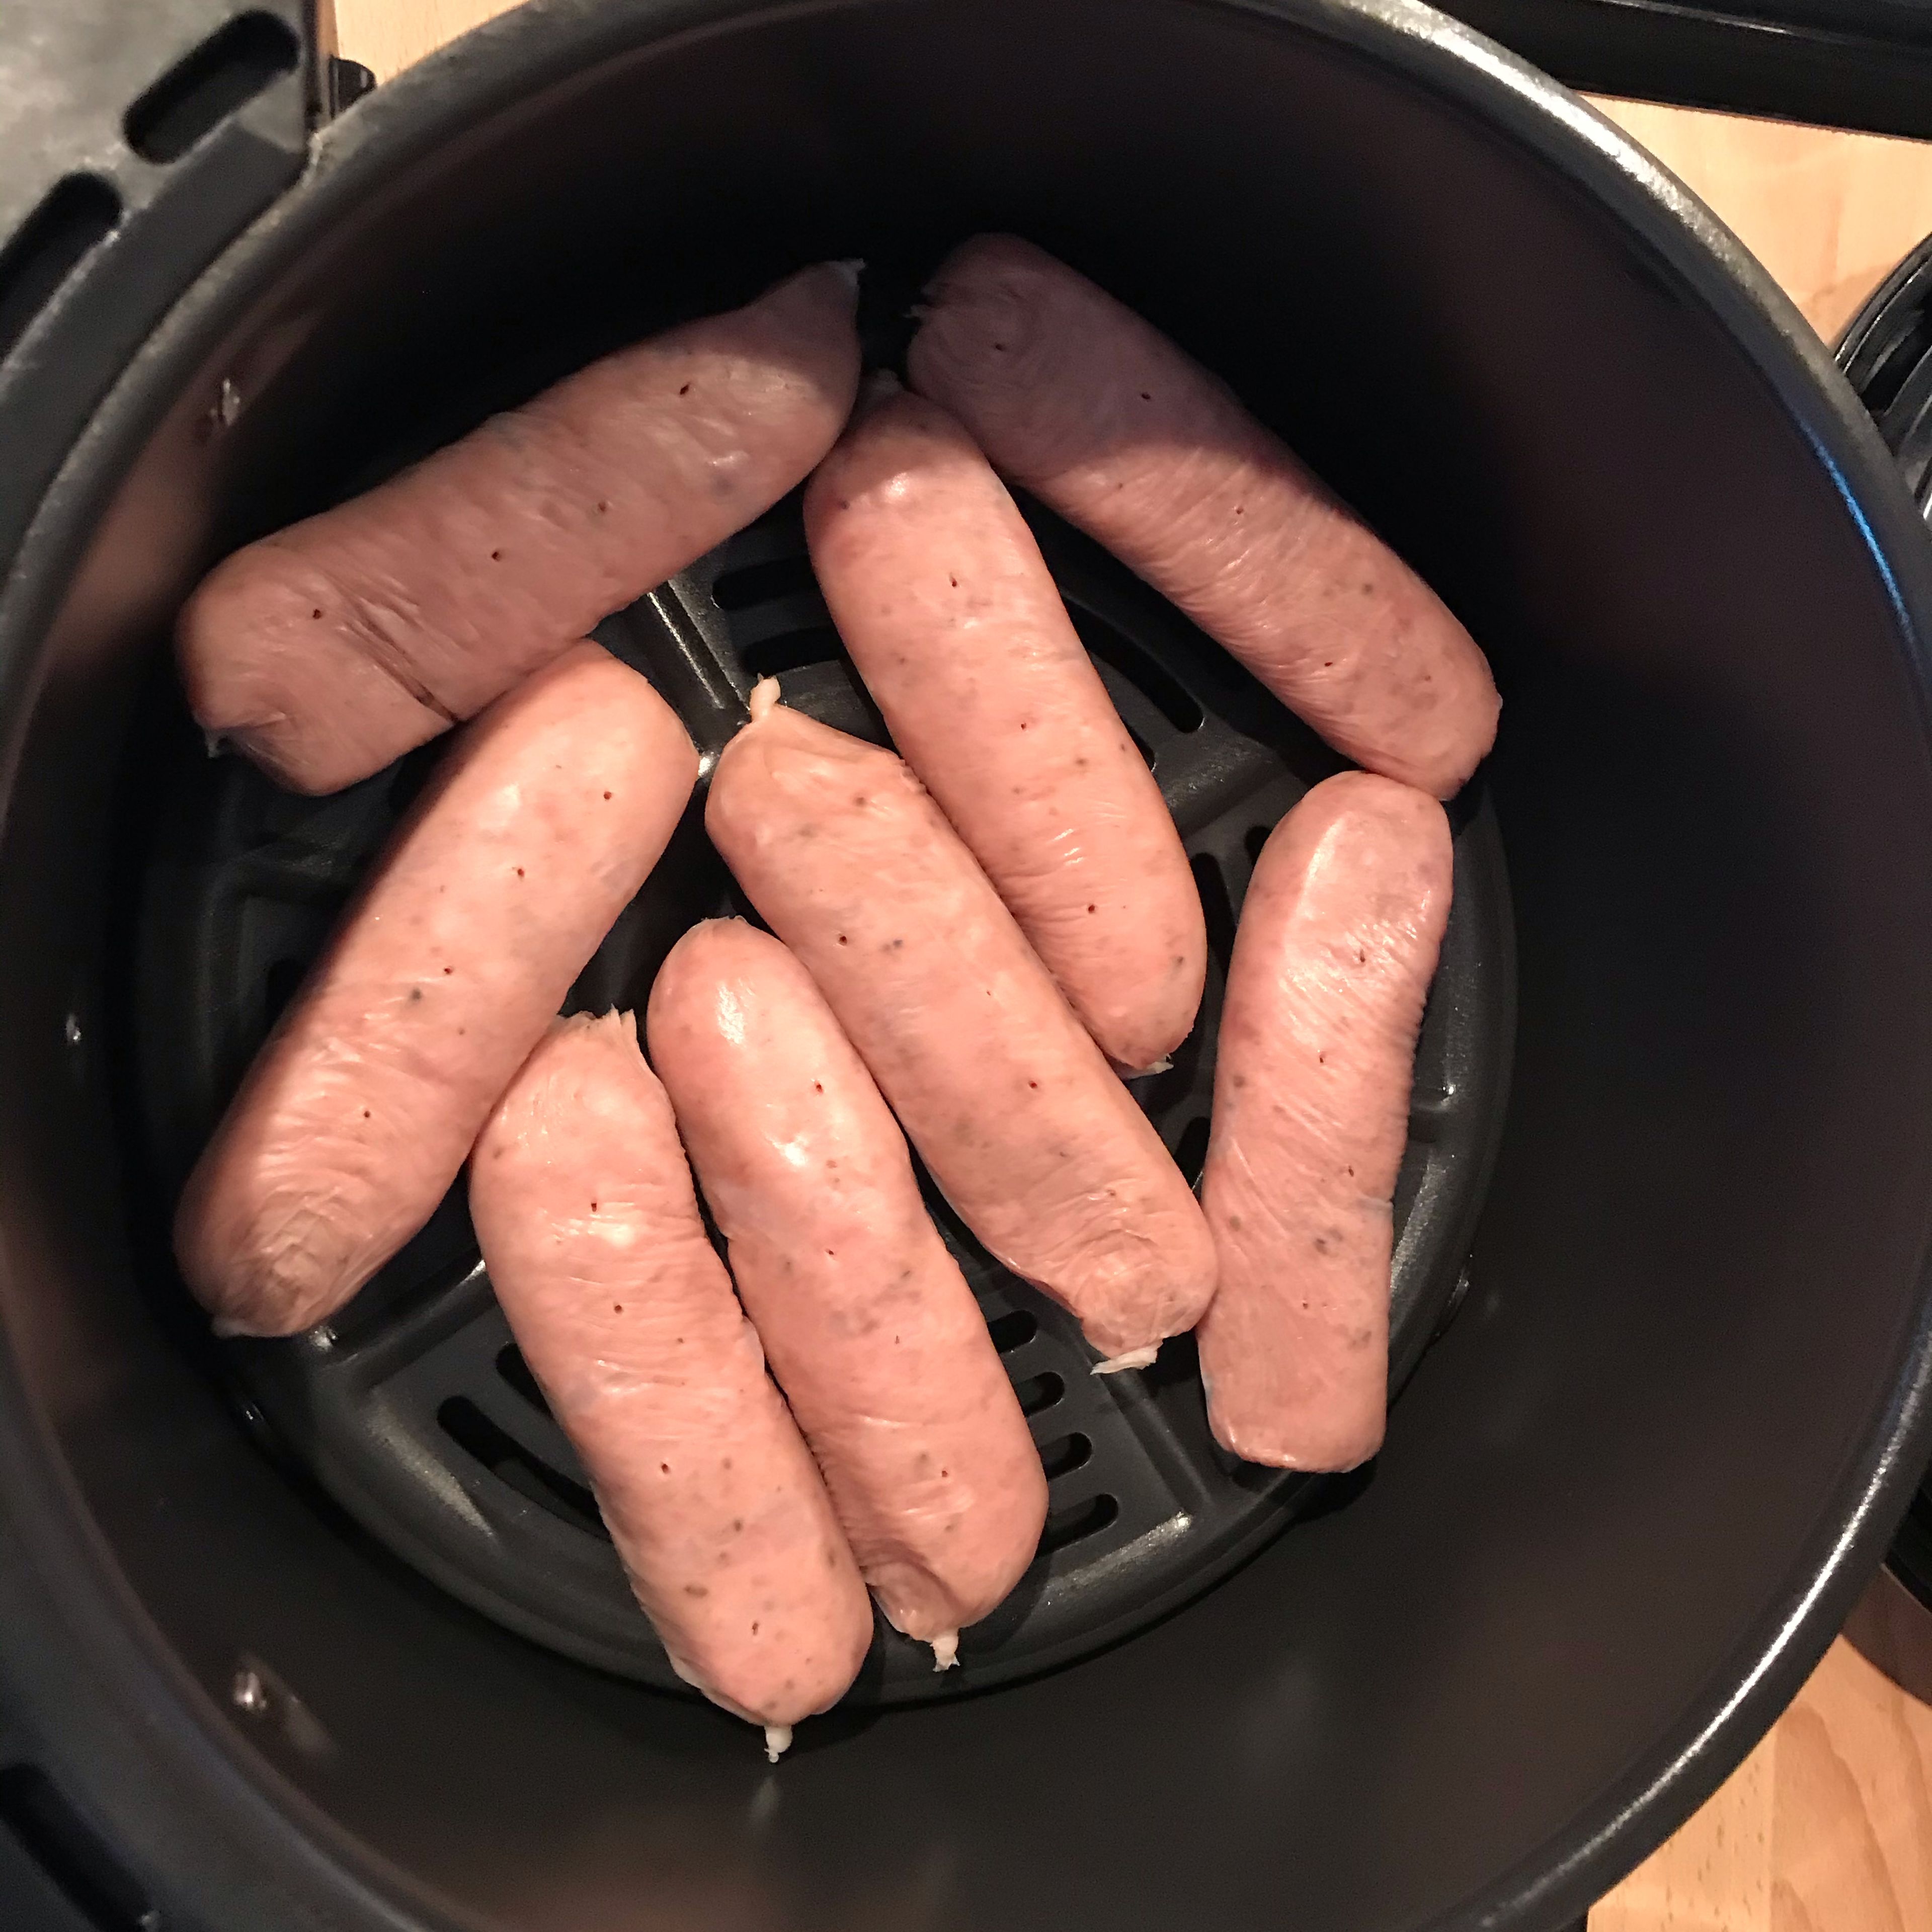 Pierce sausages then air fry for 10 minutes. Remember to toss the sausages in a pan every few minutes .